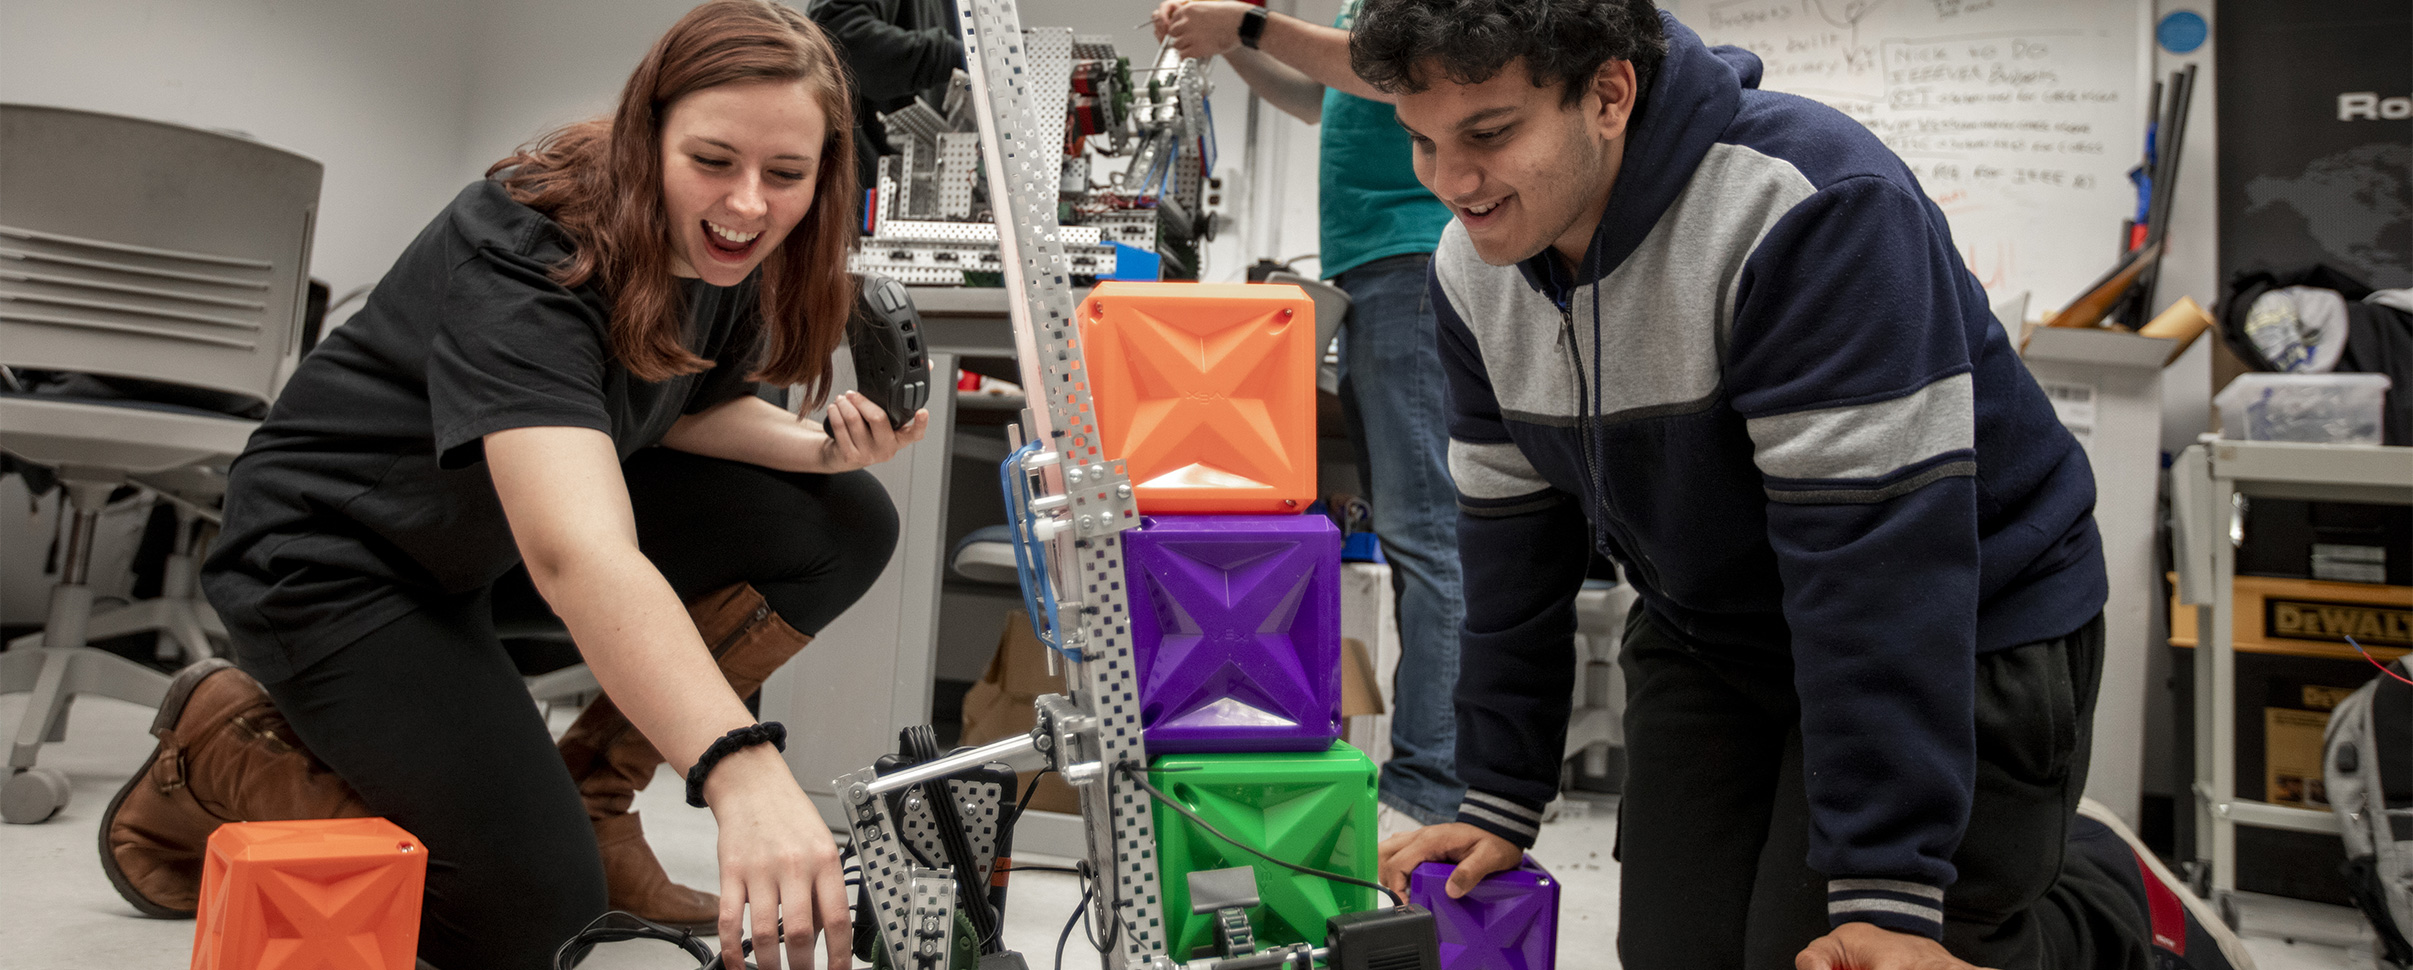 Mechanical engineering students working on project with colorful boxes